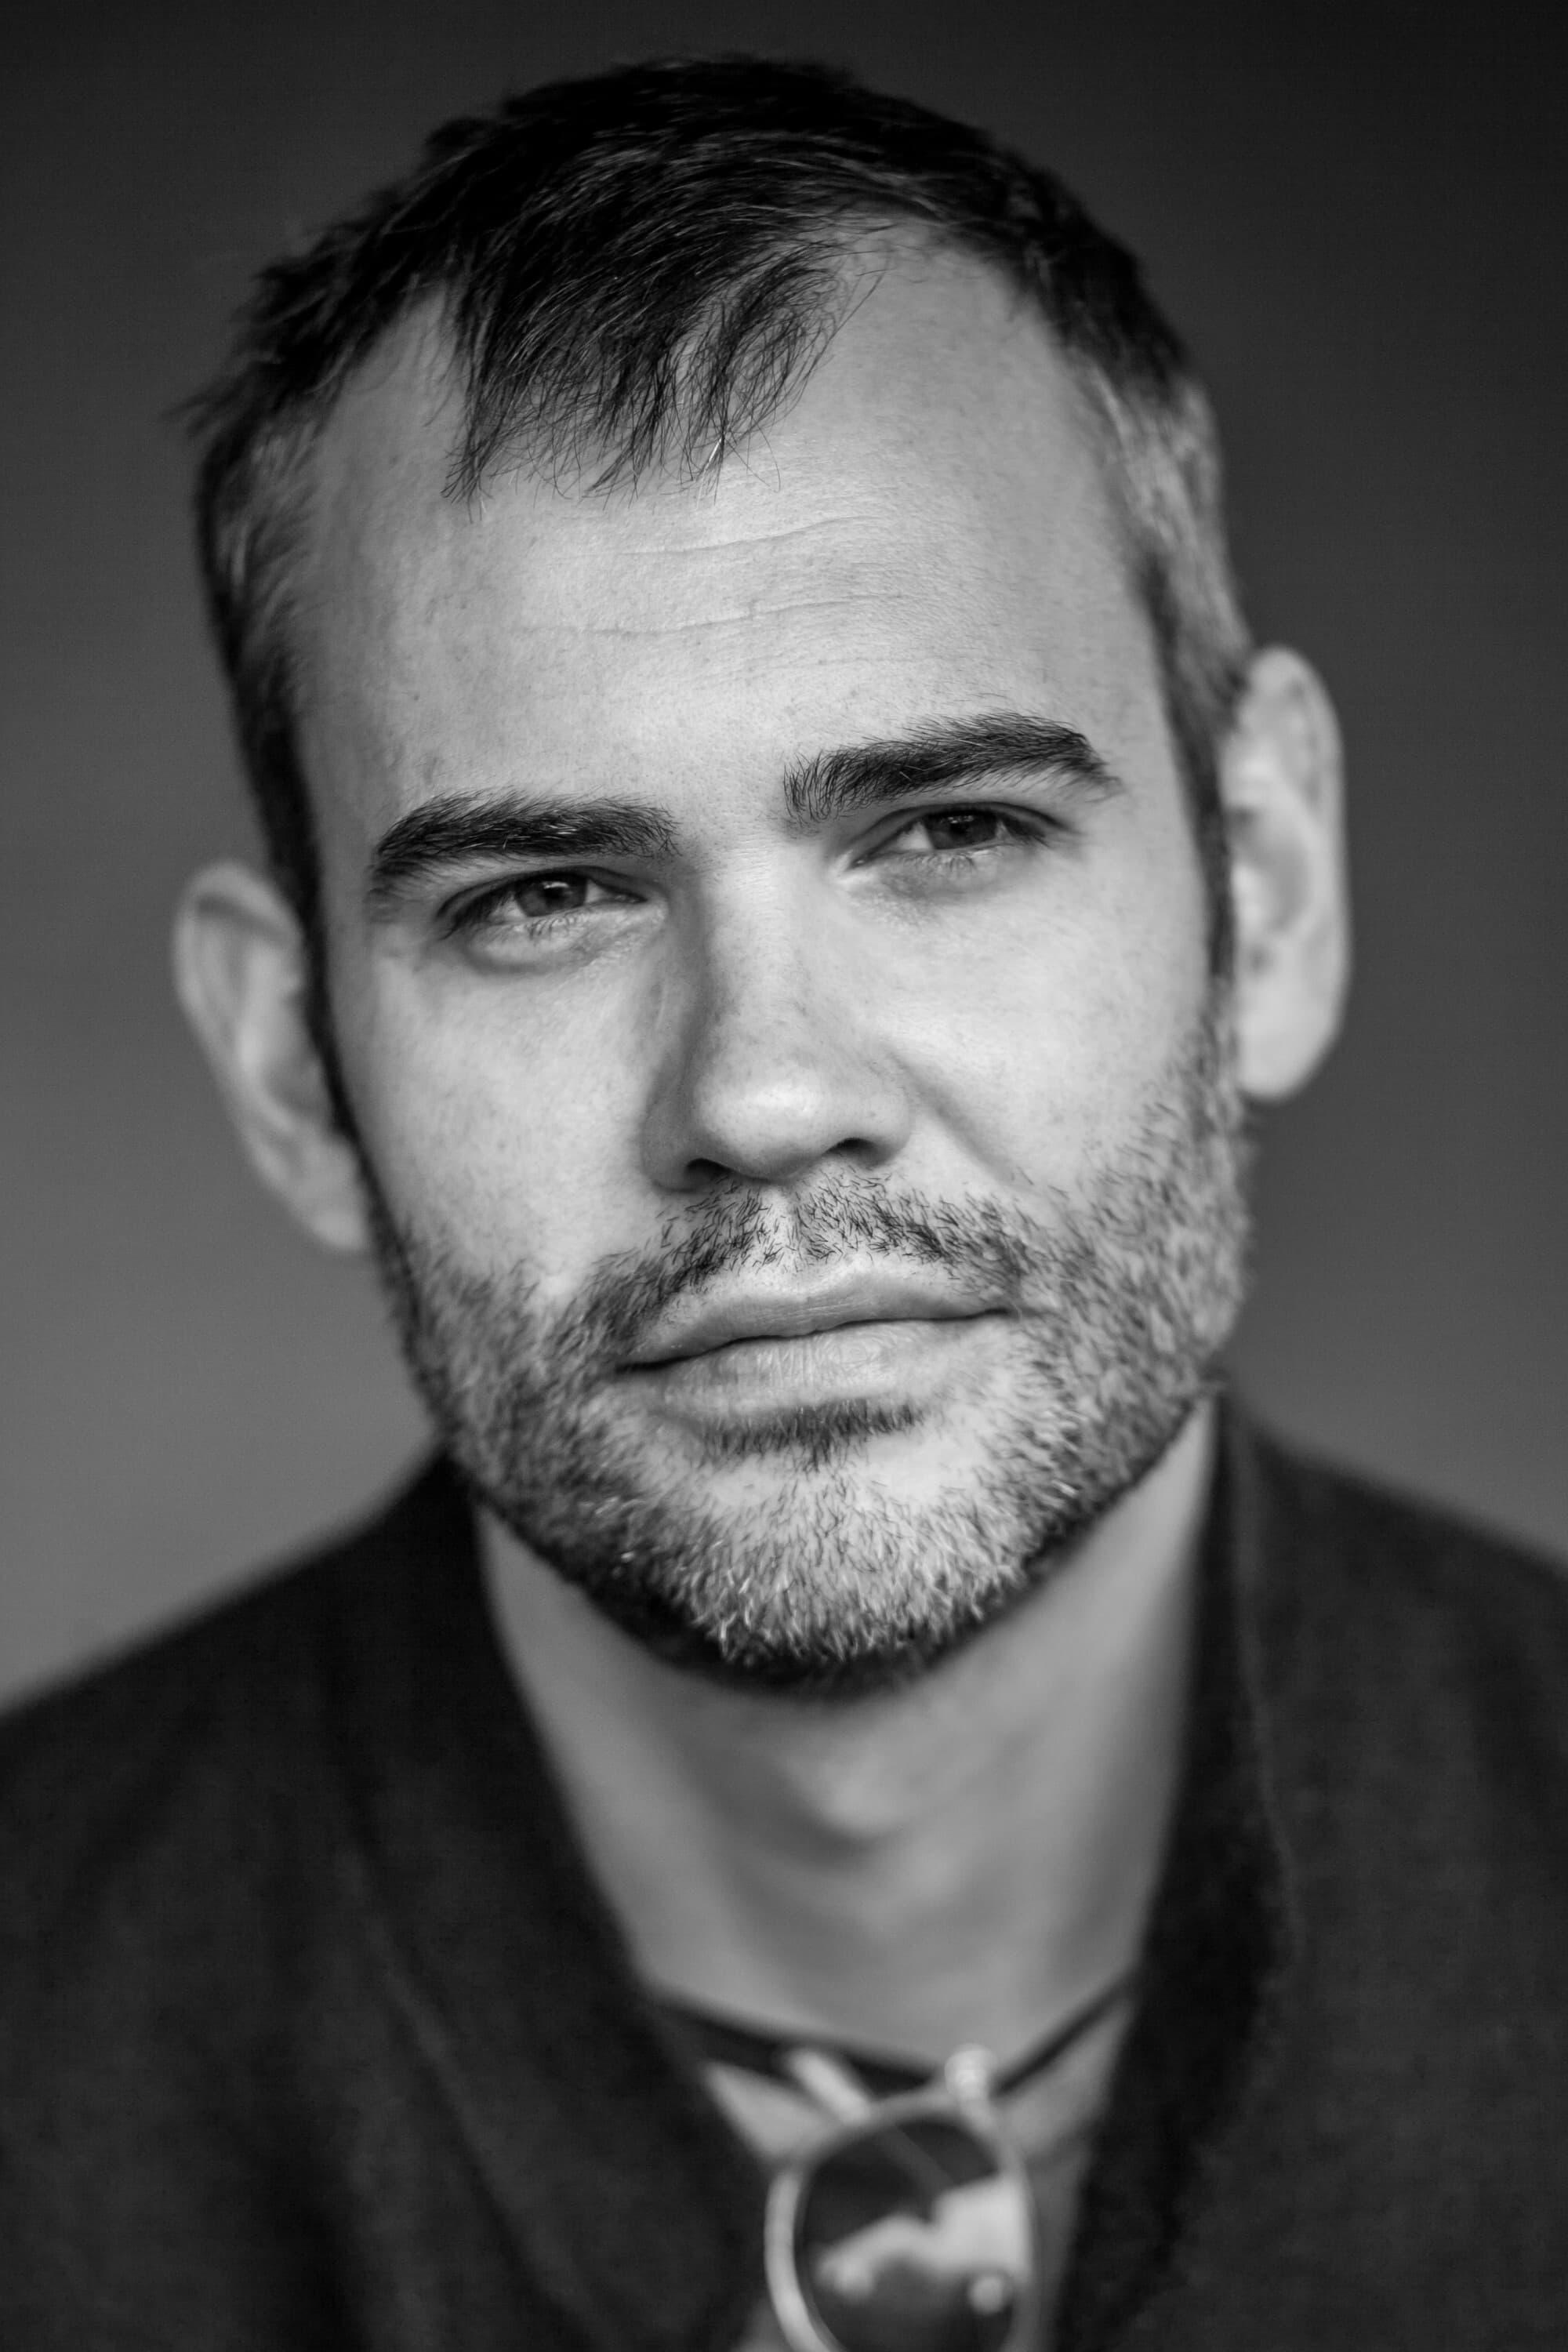 Rossif Sutherland | Mike